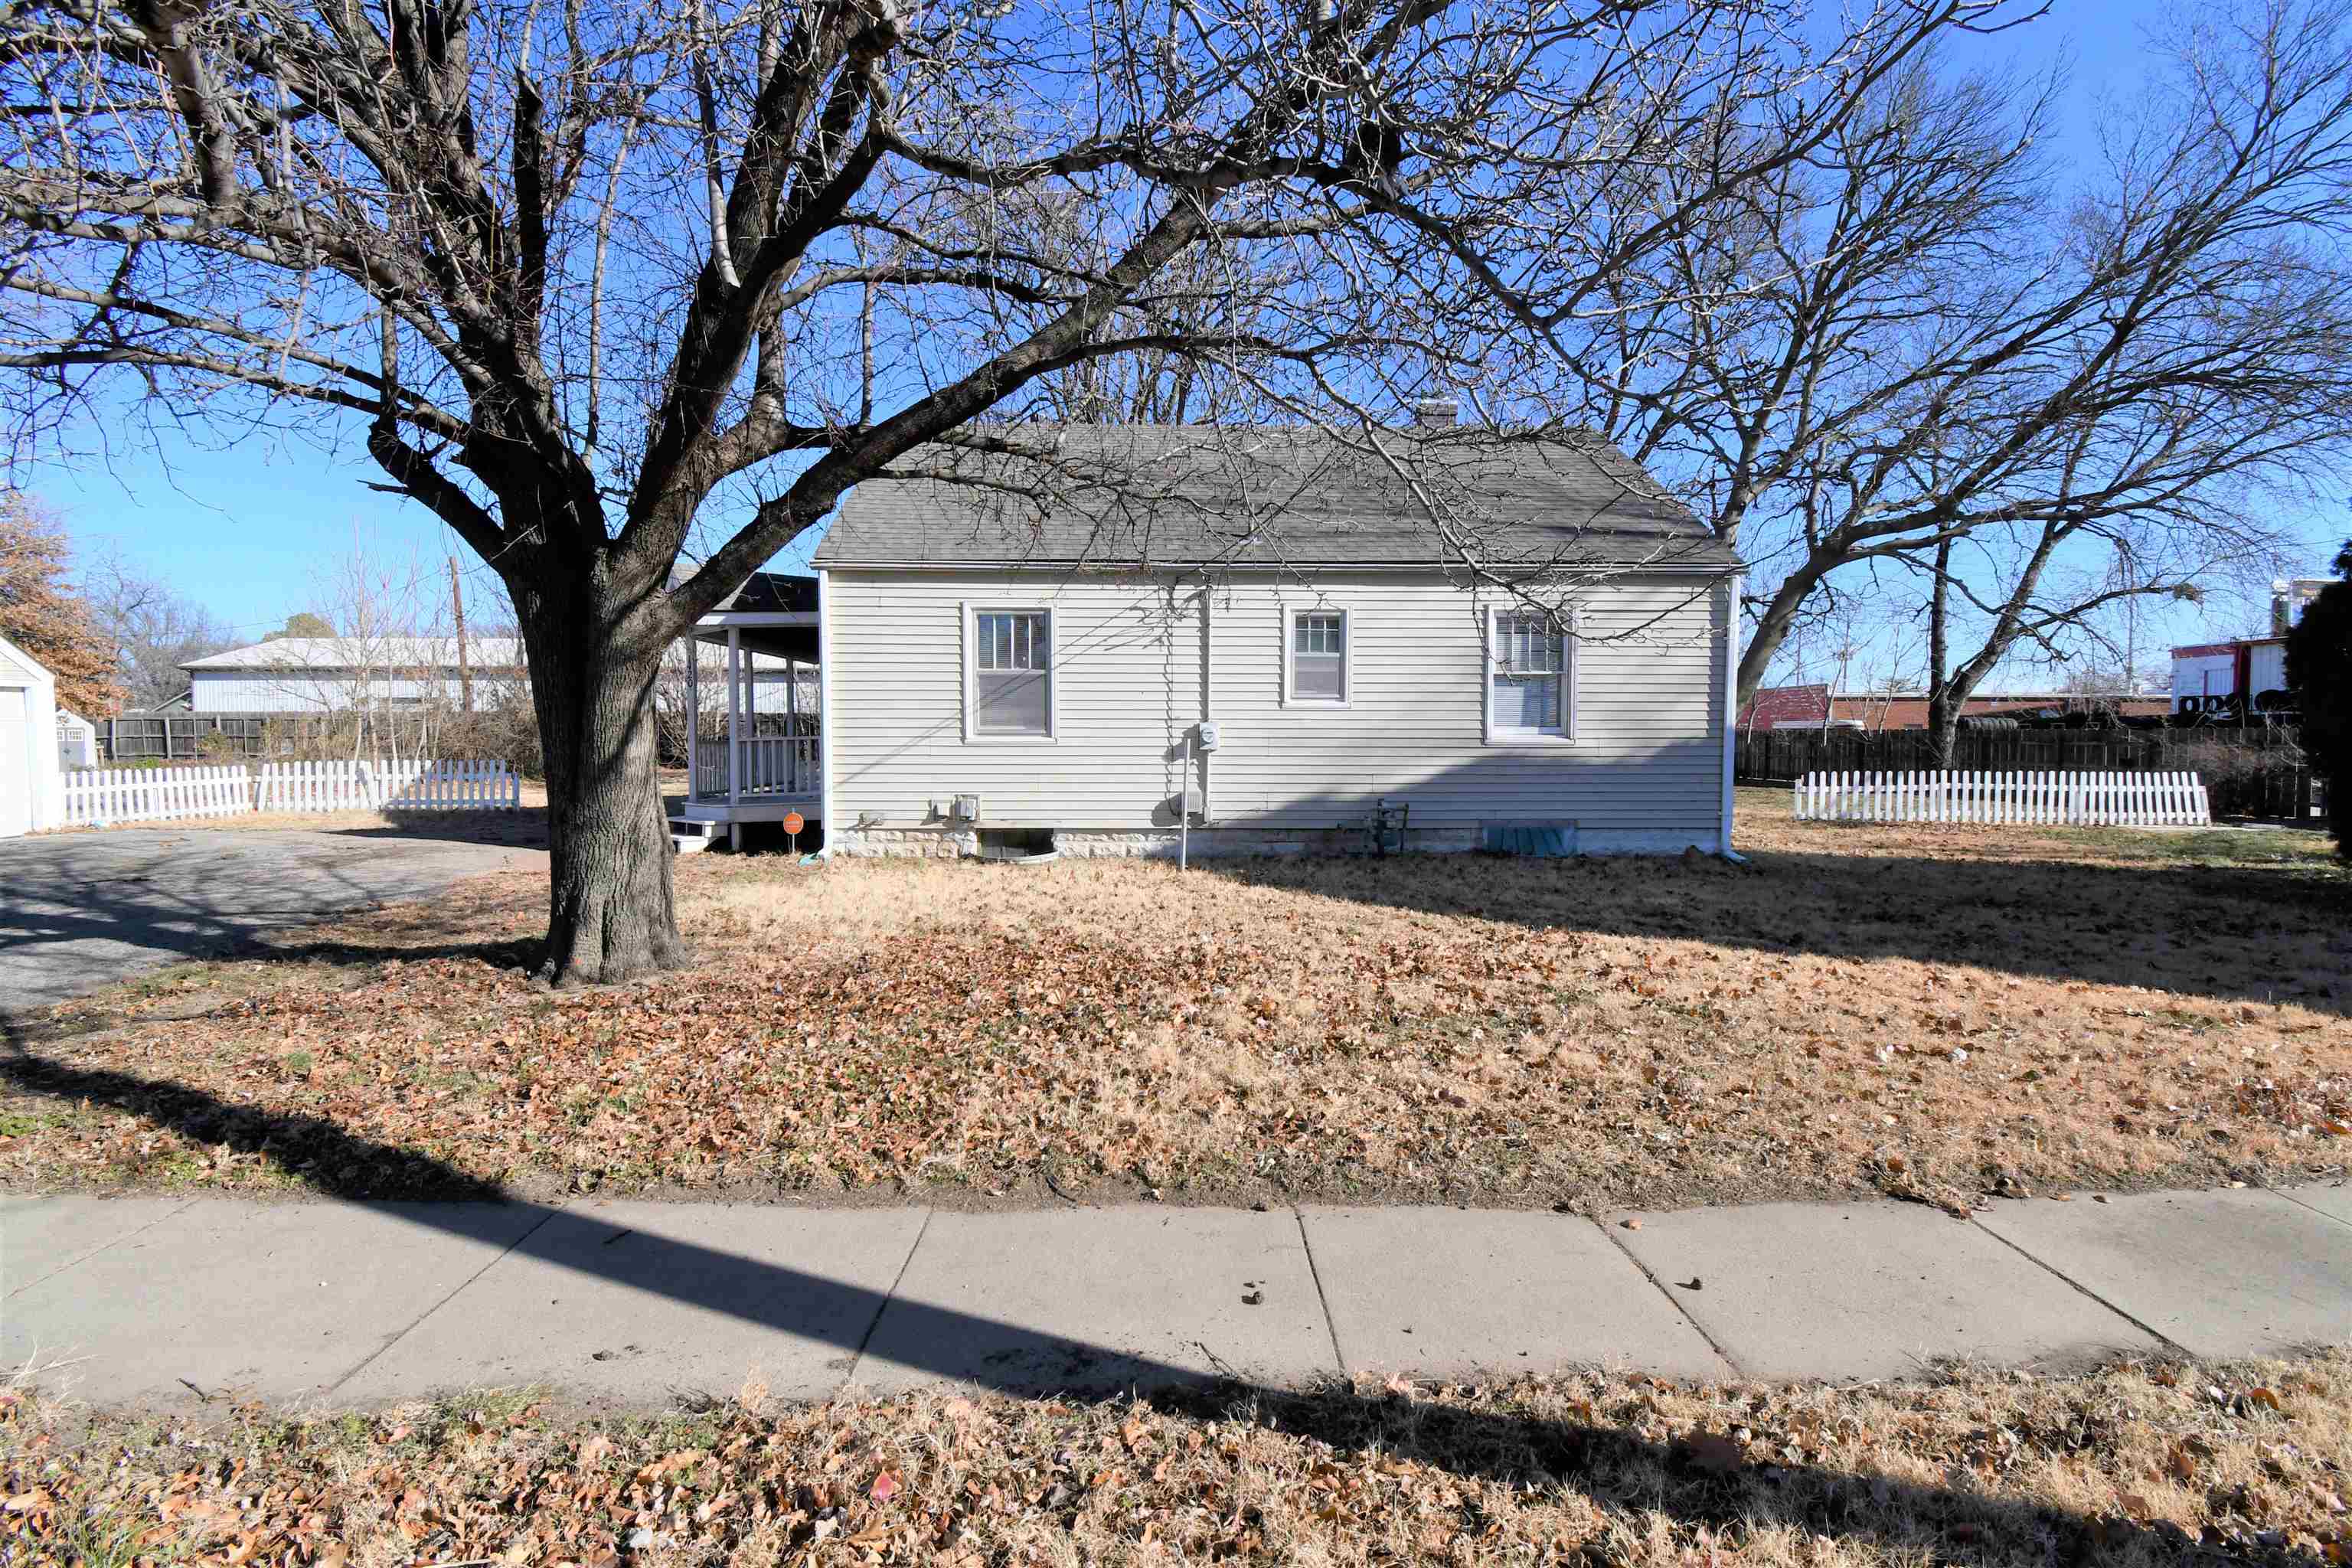 3 bedroom, 2 full baths on just shy of a 1/2 acre.  Covered porch, main floor laundry, 2 car garage 